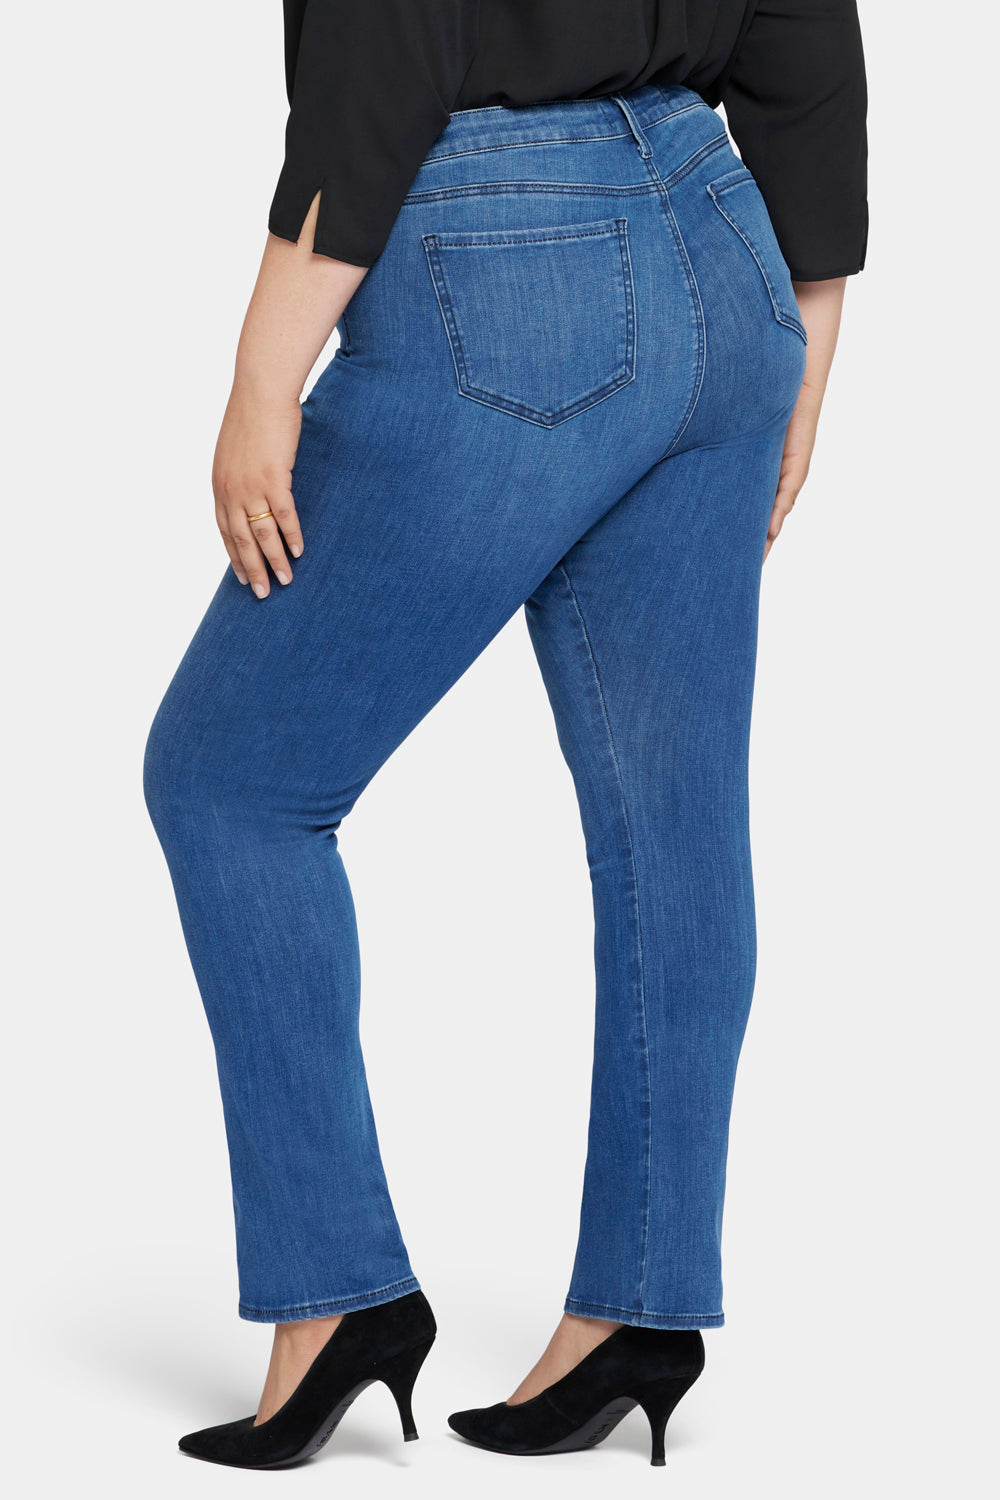 NYDJ Le Silhouette Slim Bootcut Jeans In Plus Size With High Rise  - Amour